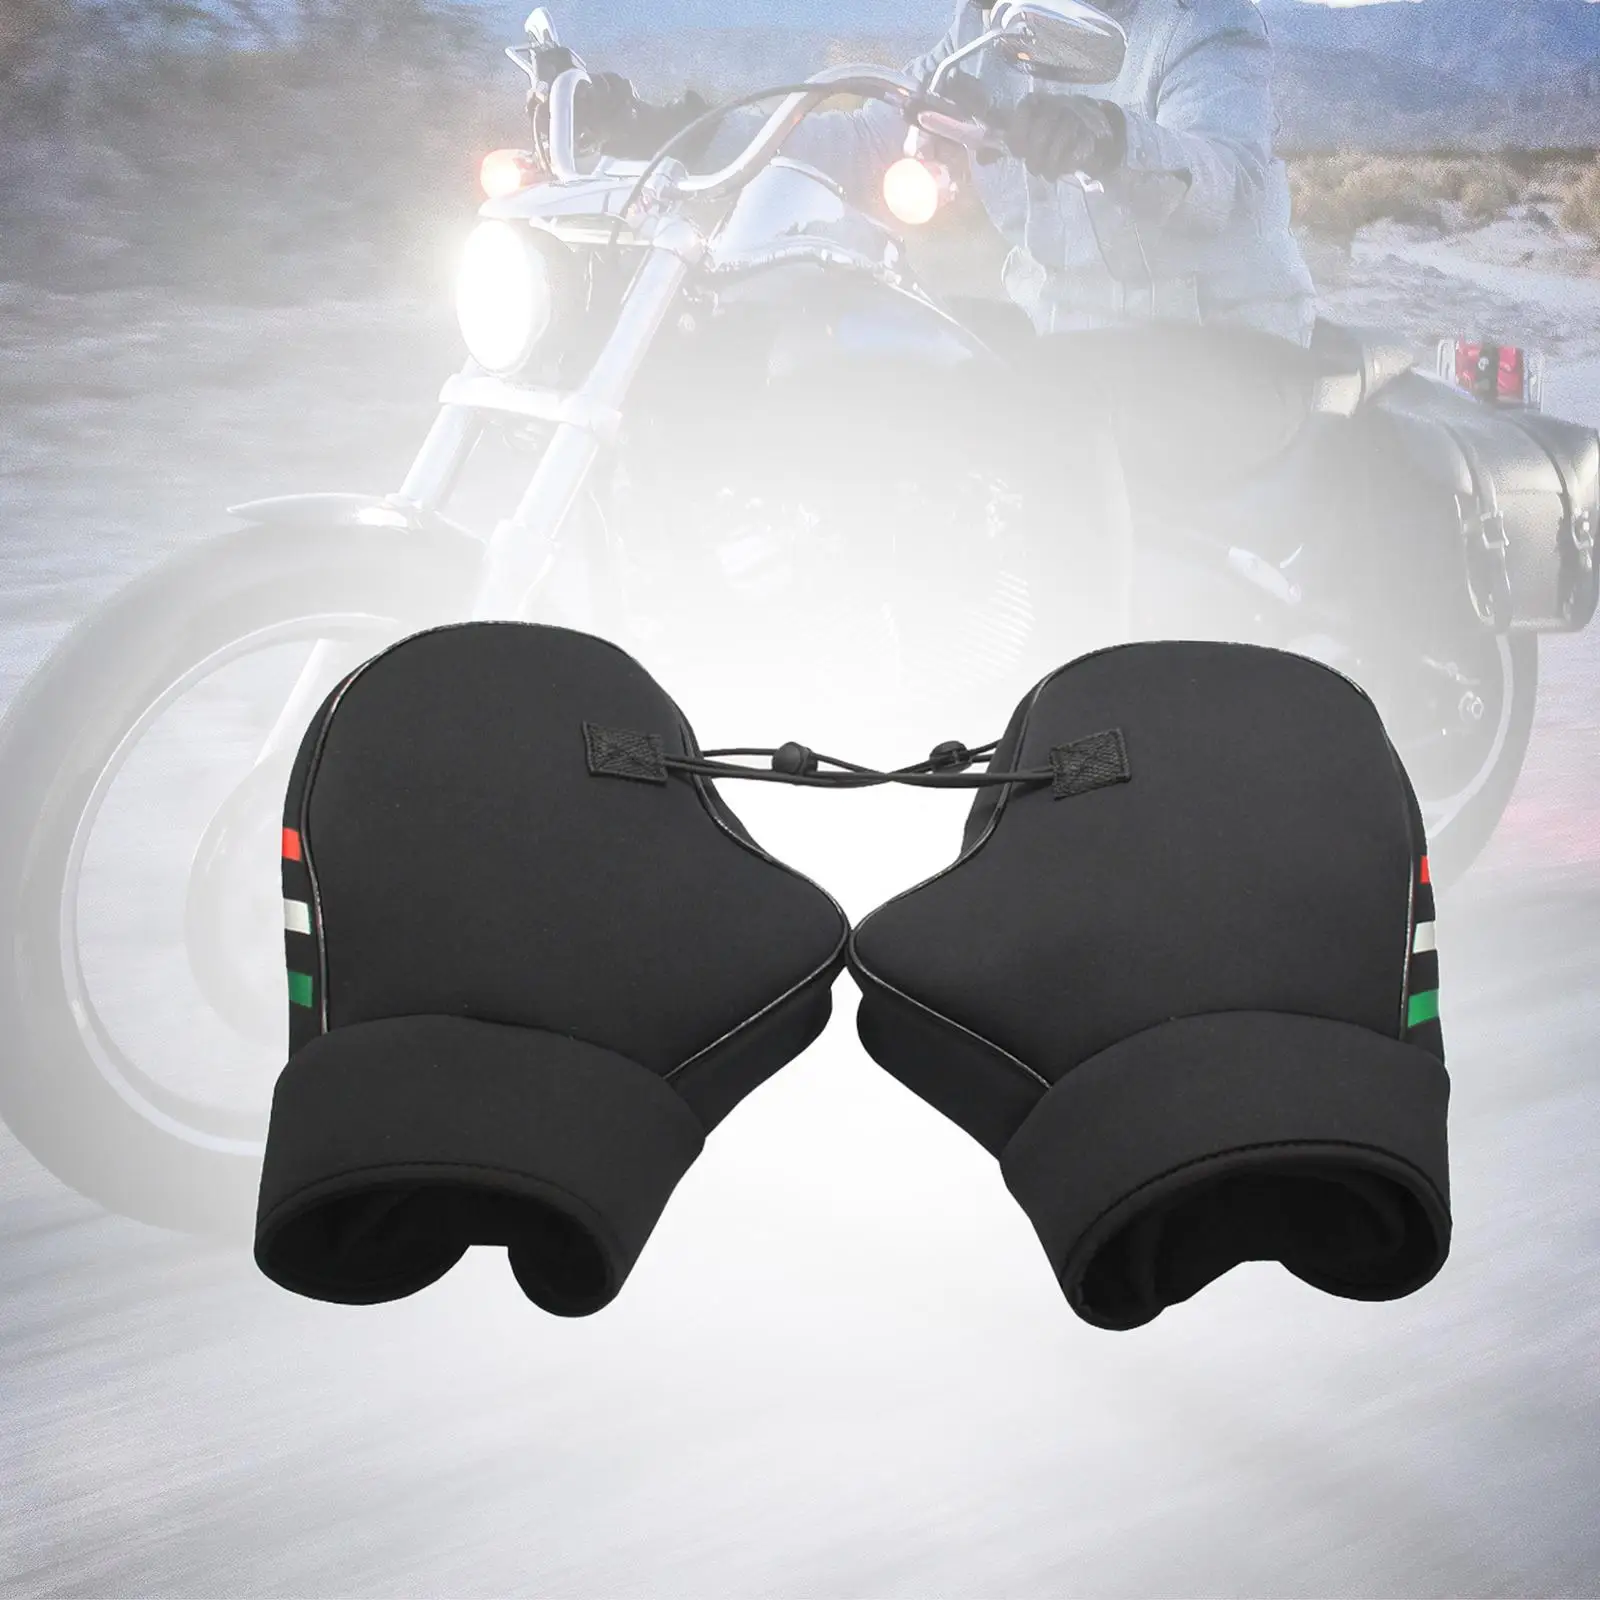 2 Pieces Motorcycle Warm Handlebar Gloves Handlebar Muffs for Cold Weather Riding Easy to Install Motorcycle Handlebar Mitts